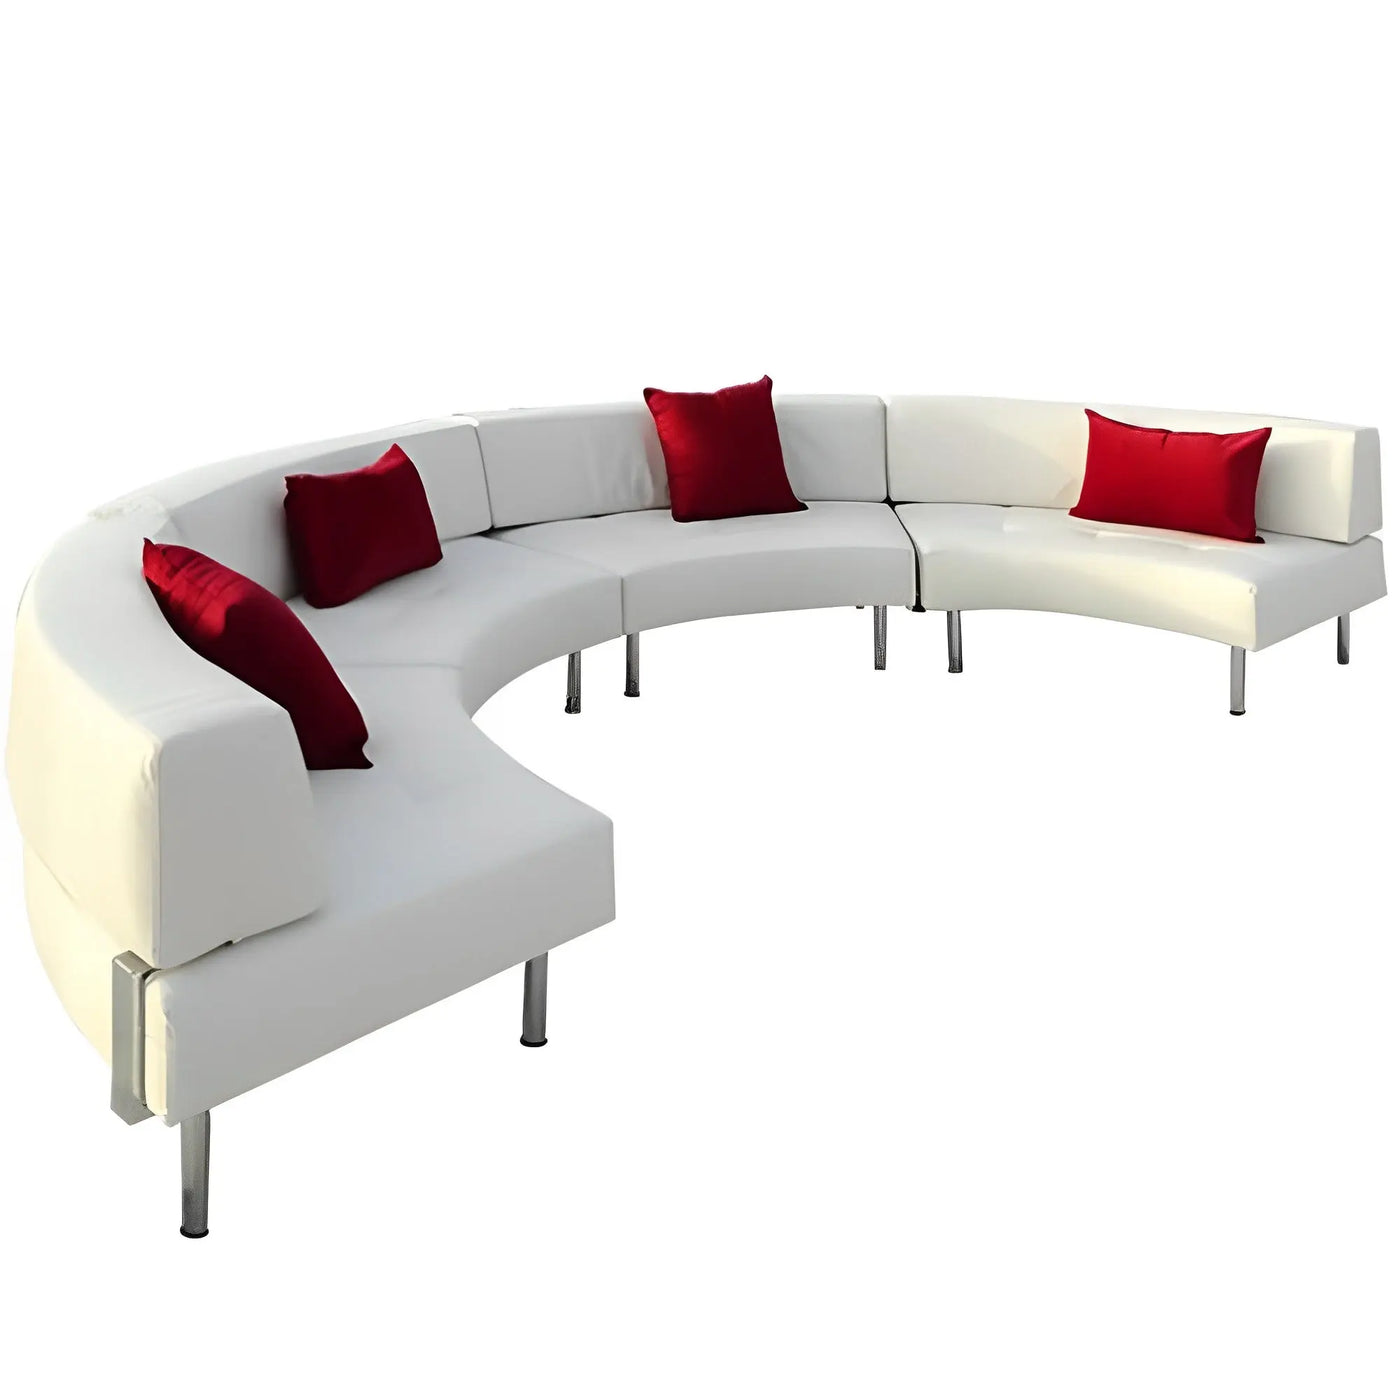 Endless 8 seater curved semi-circle sofa with large low back Desert River Rentals